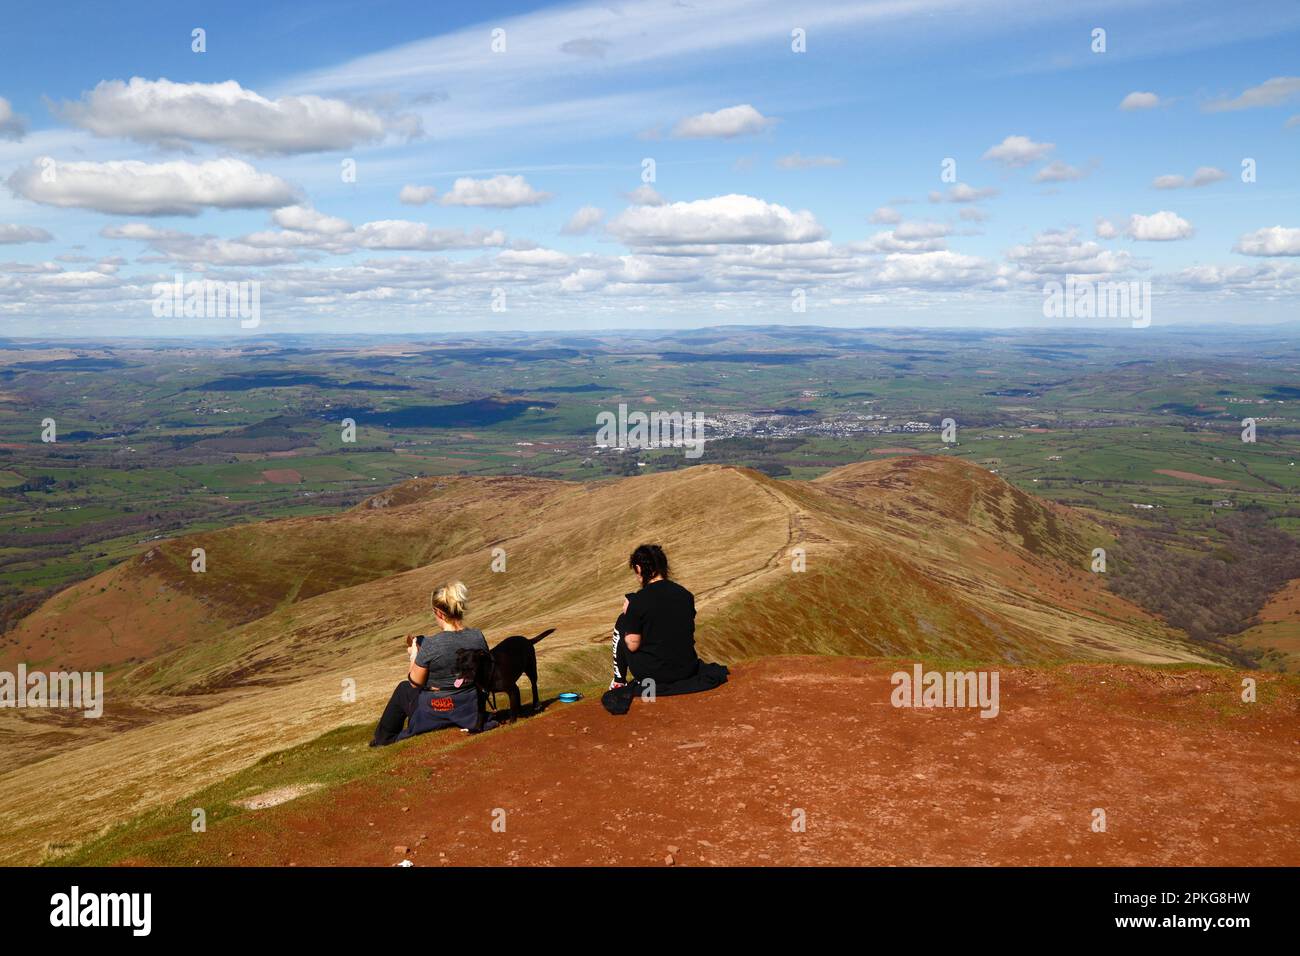 UK Weather: Good Friday bank holiday, April 7th, 2023. Brecon Beacons National Park, South Wales. Hikers looking at their smartphones on the summit of Pen y Fan in the Brecon Beacons National Park. The town of Brecon is in the distance, the ridge in the centre is Cefn Cwm Llwch, the approach route from the north. Beautiful sunny weather meant many people made the trip to the Park for today's bank holiday. Stock Photo